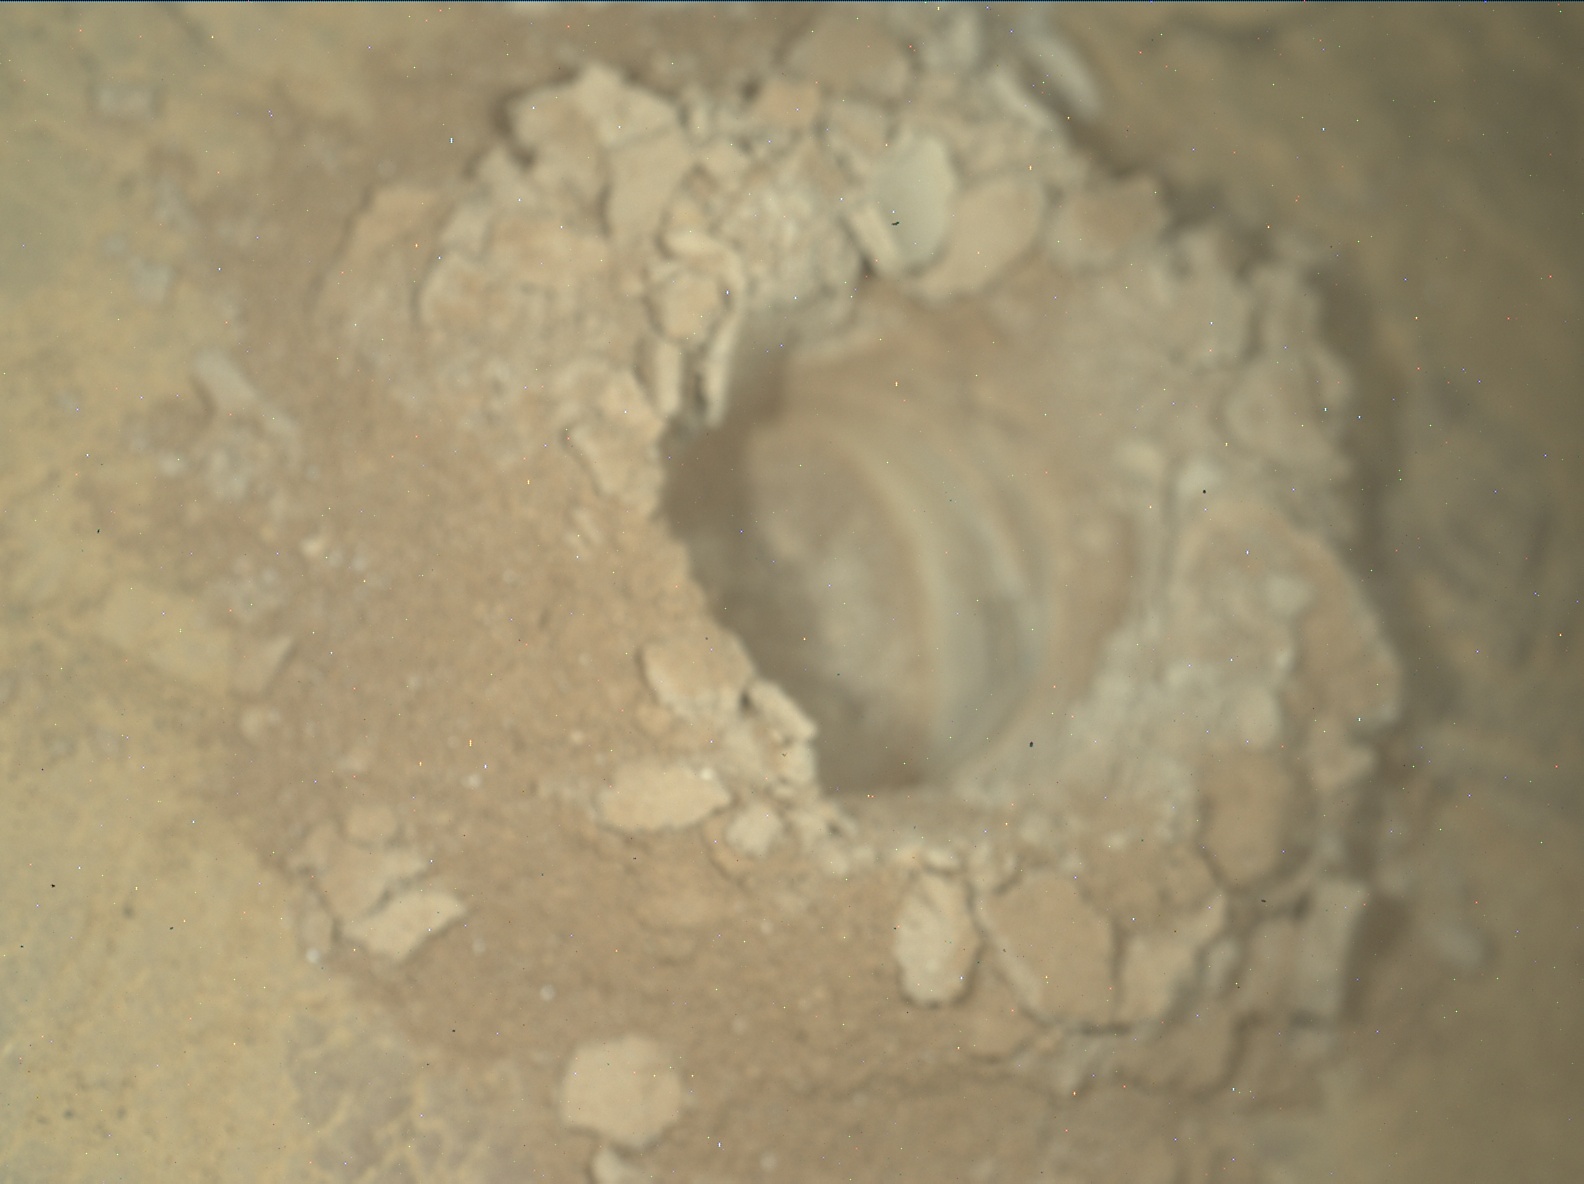 Nasa's Mars rover Curiosity acquired this image using its Mars Hand Lens Imager (MAHLI) on Sol 2551